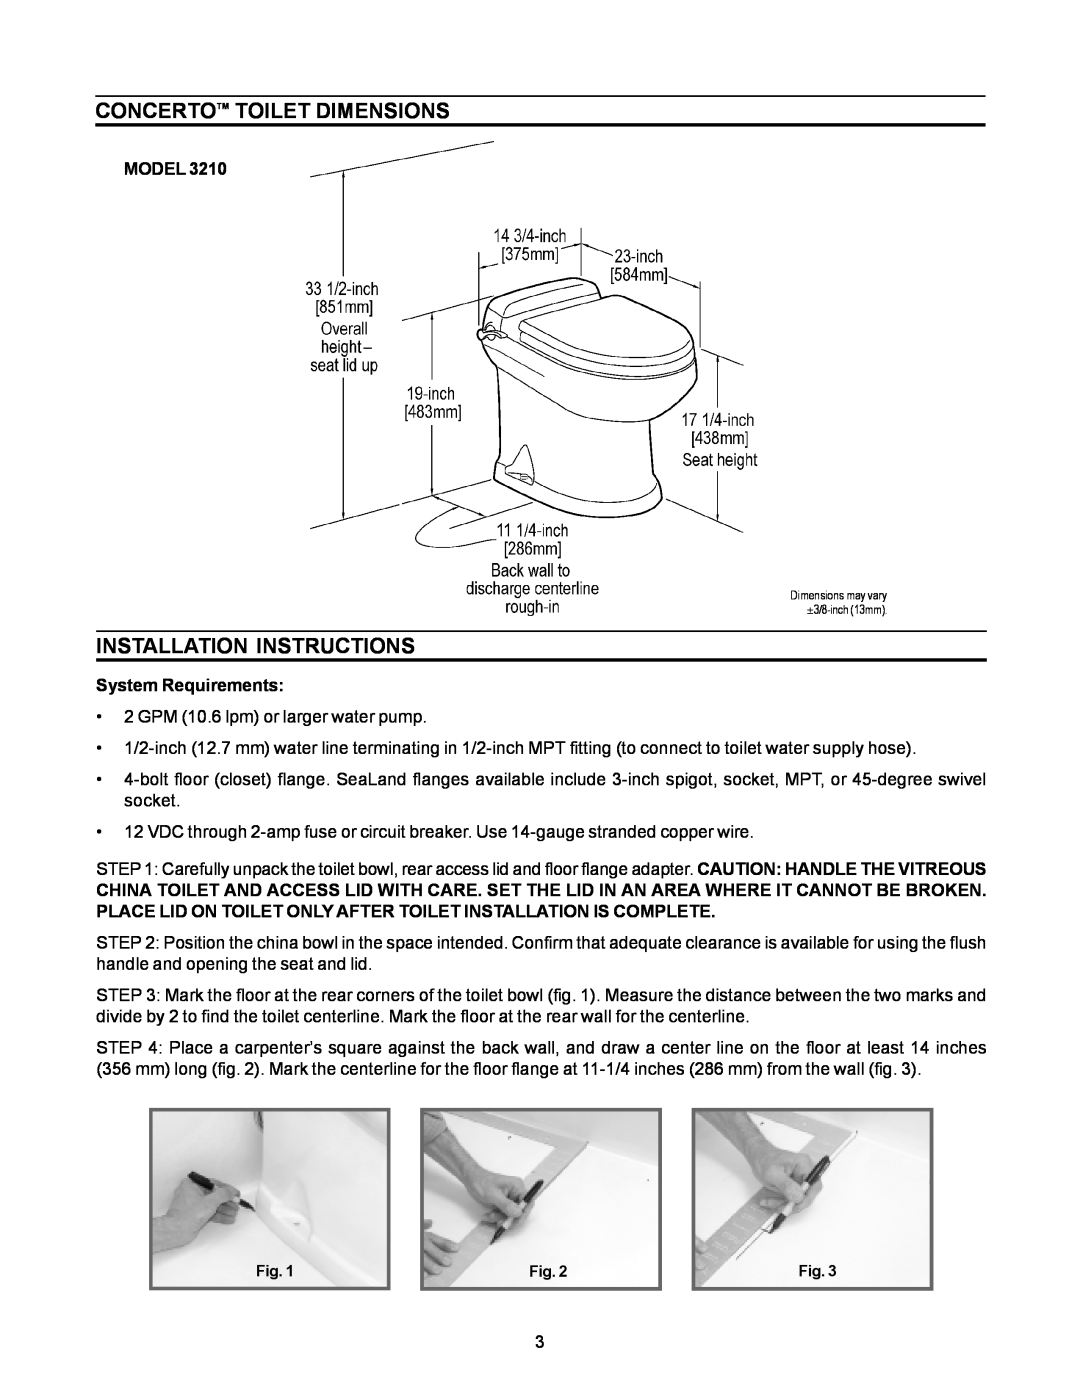 Dometic 3210 manual Concertotm Toilet Dimensions, Installation Instructions, Model, System Requirements 